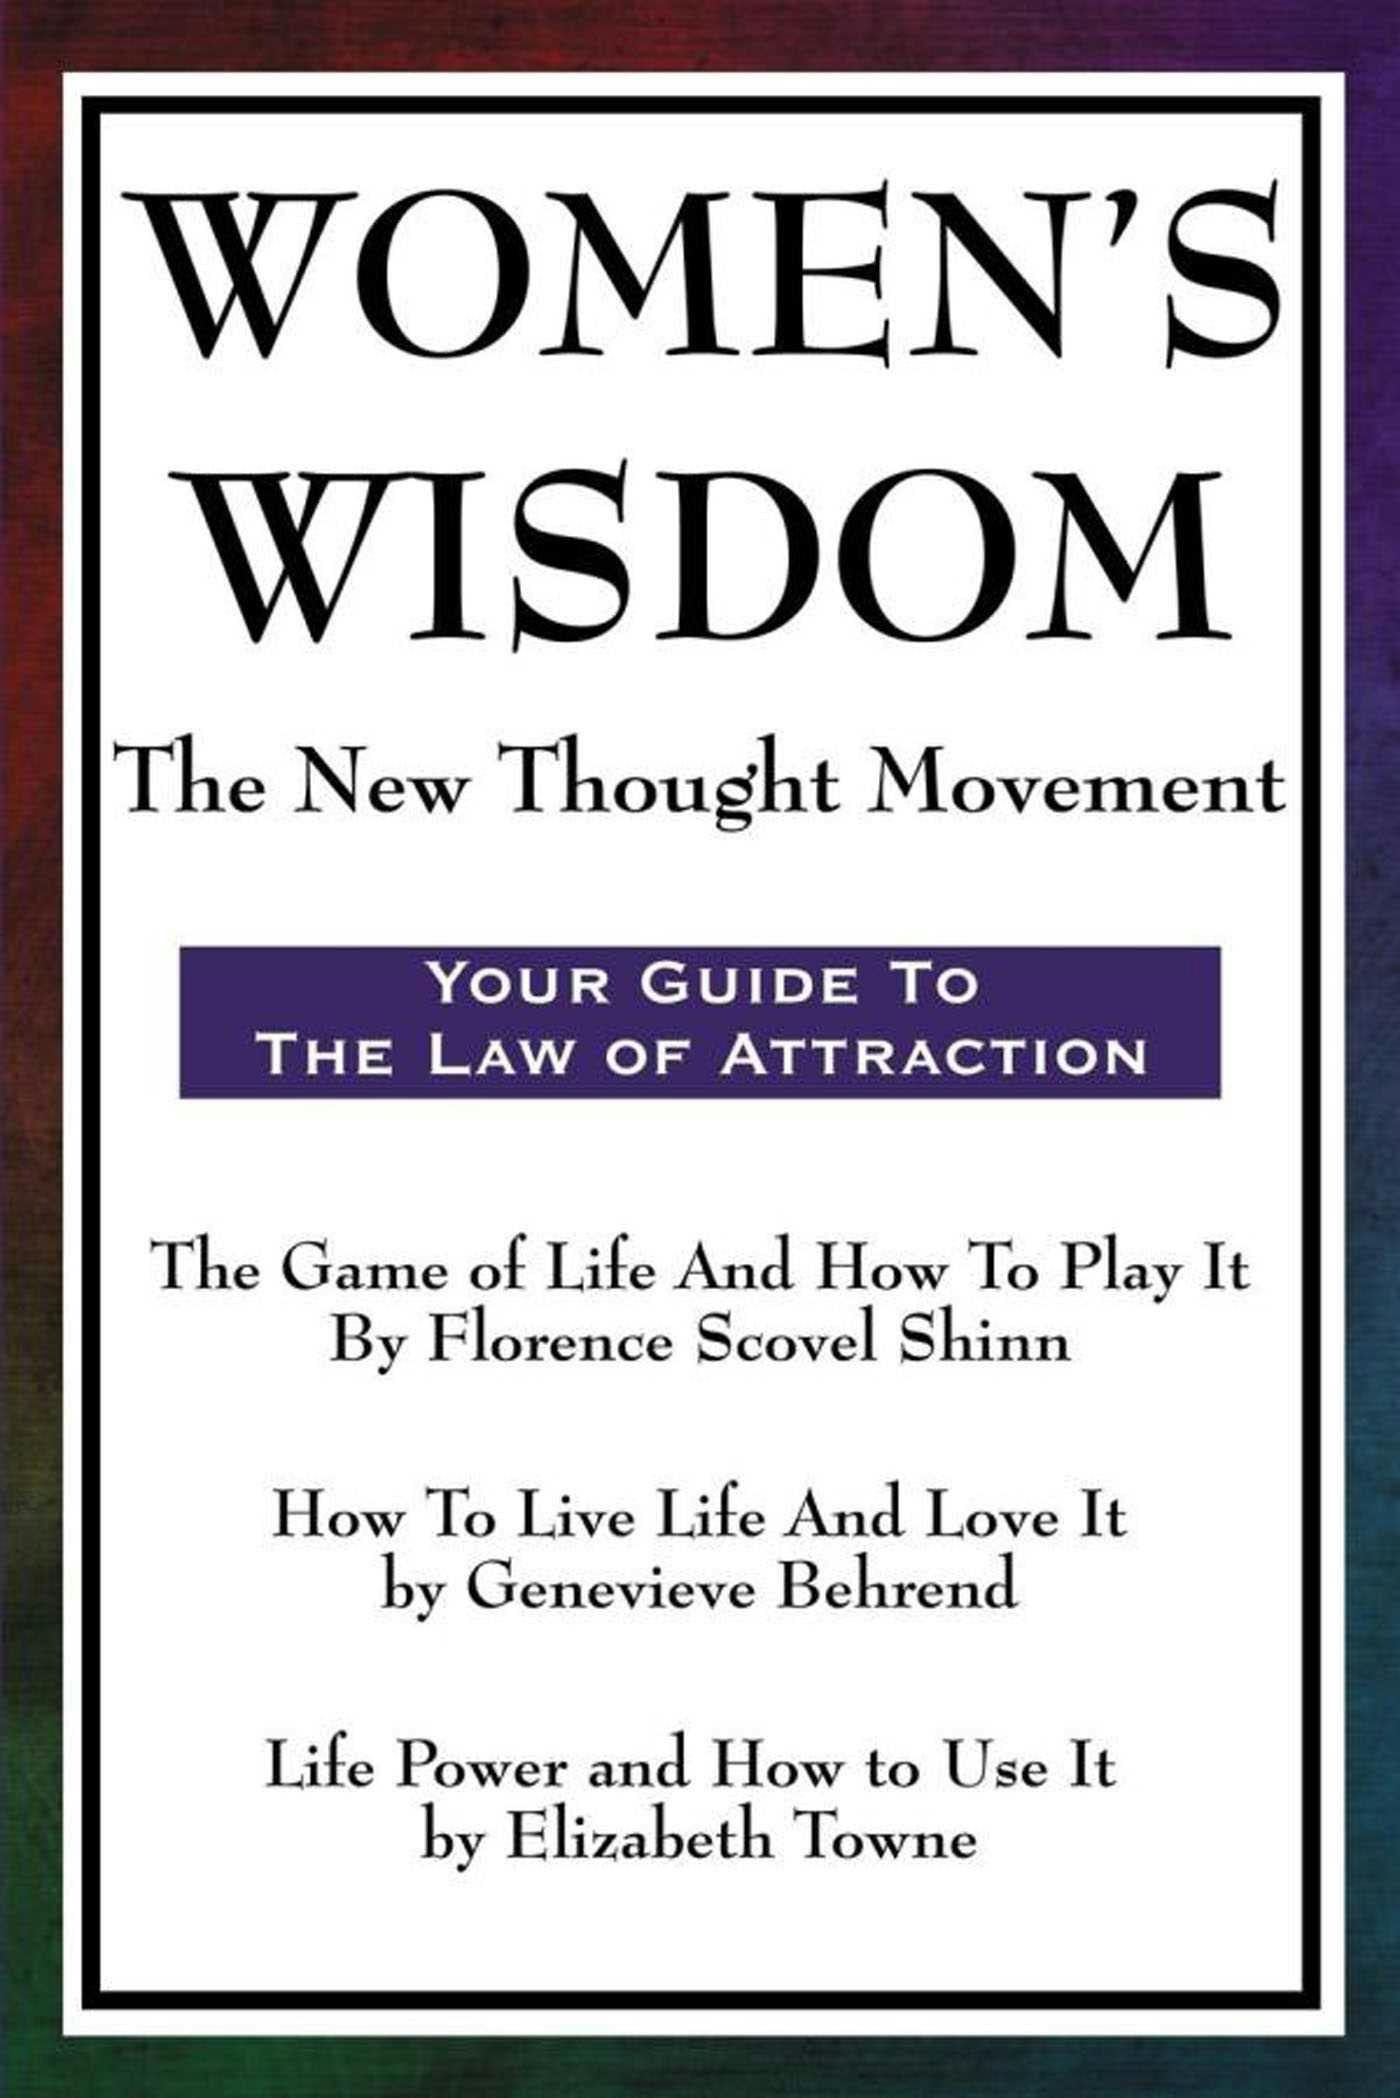 The Game of Life and How to Play It: Revised Edition (Paperback)